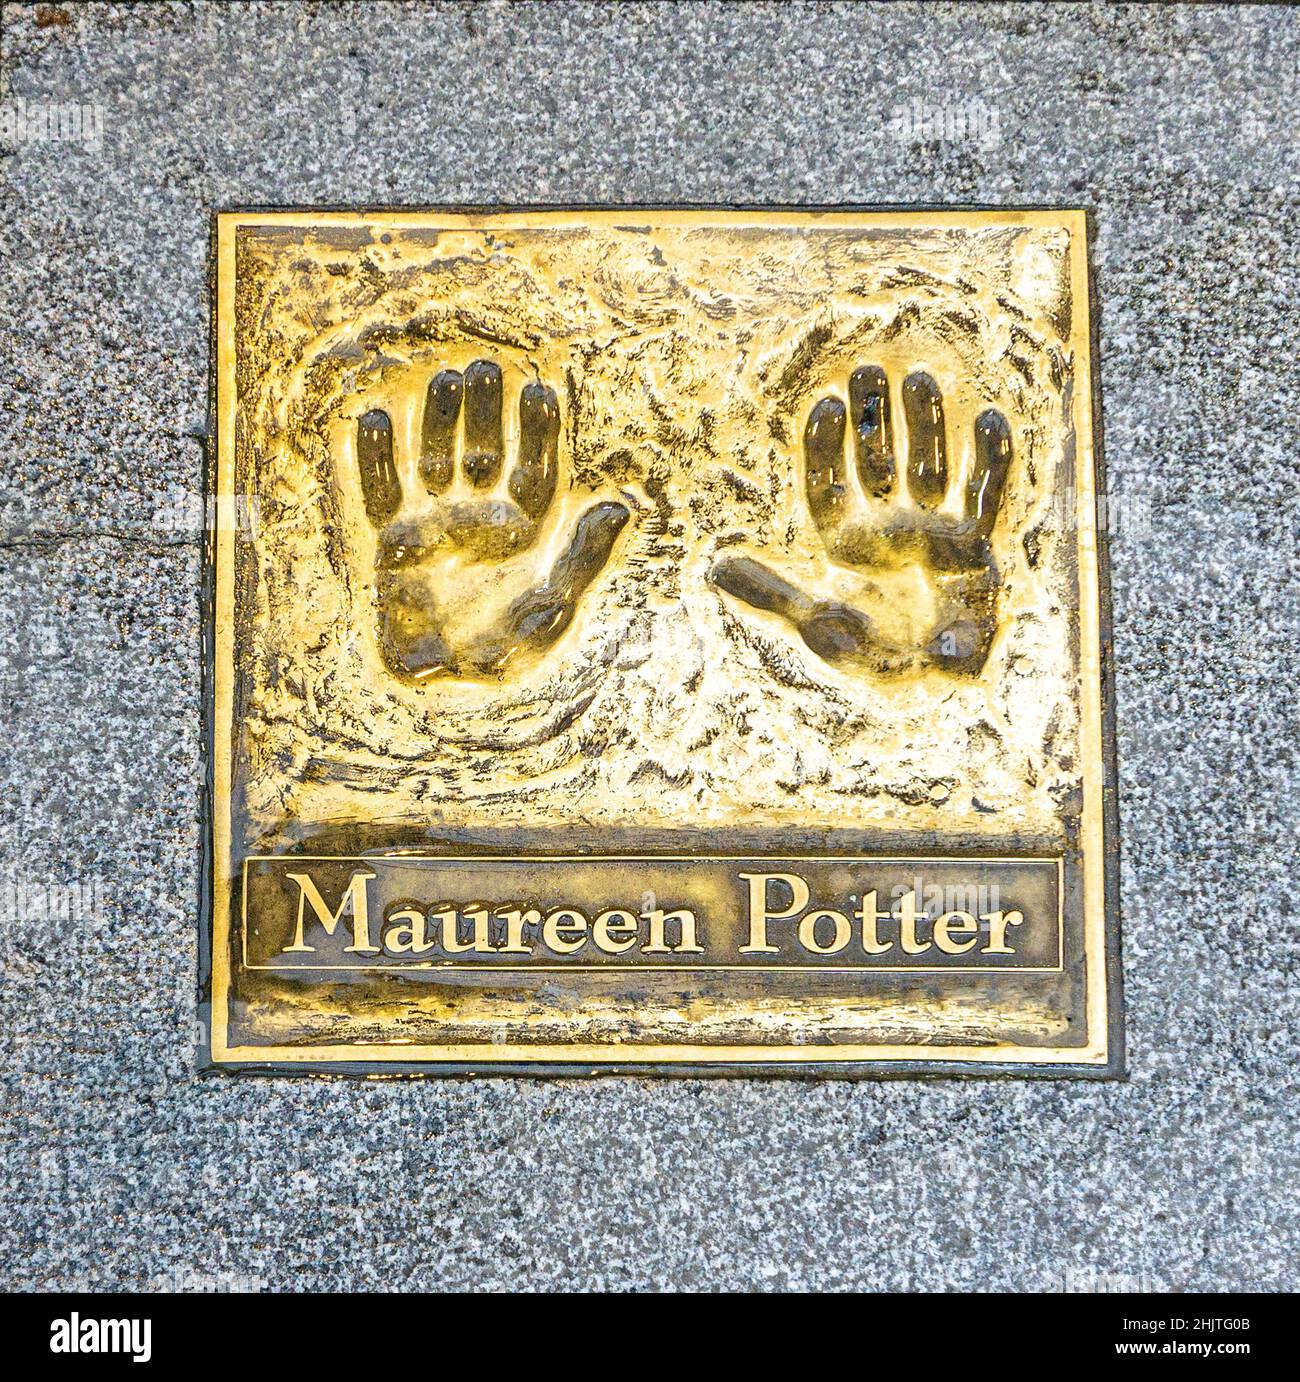 The handprints of Maureen Potter, the Irish actress and comedienne, on the pavement outside the Gaiety Theatre in Dublin, Ireland. Stock Photo